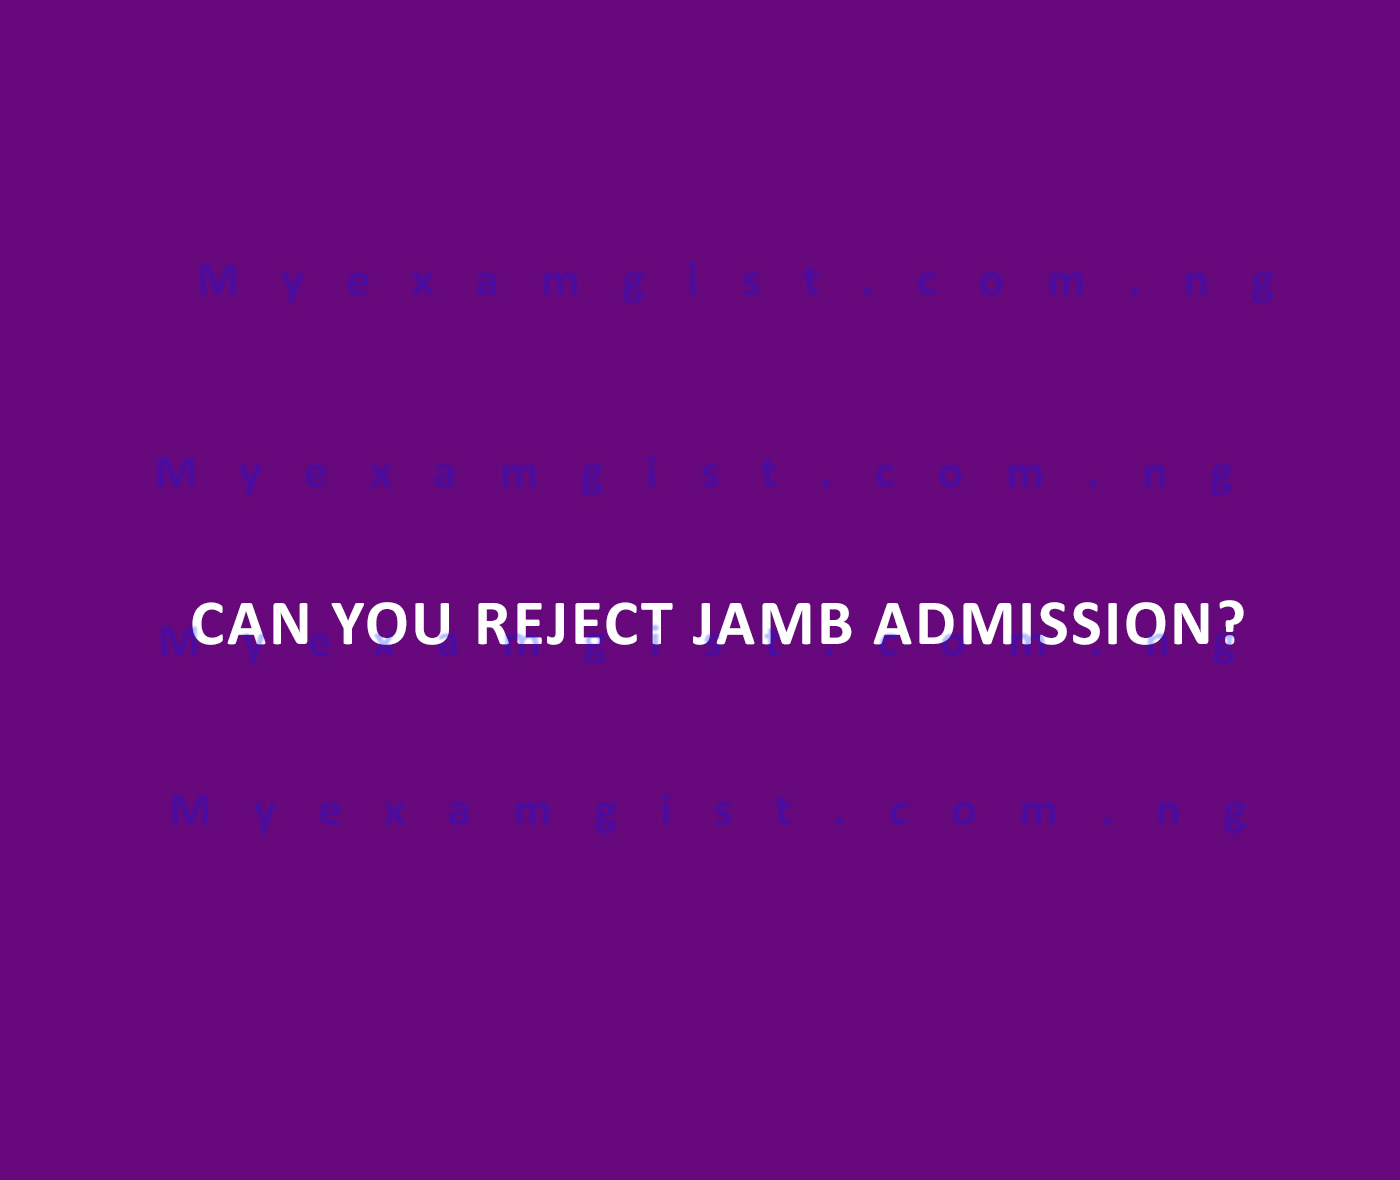 Can you reject JAMB admission?